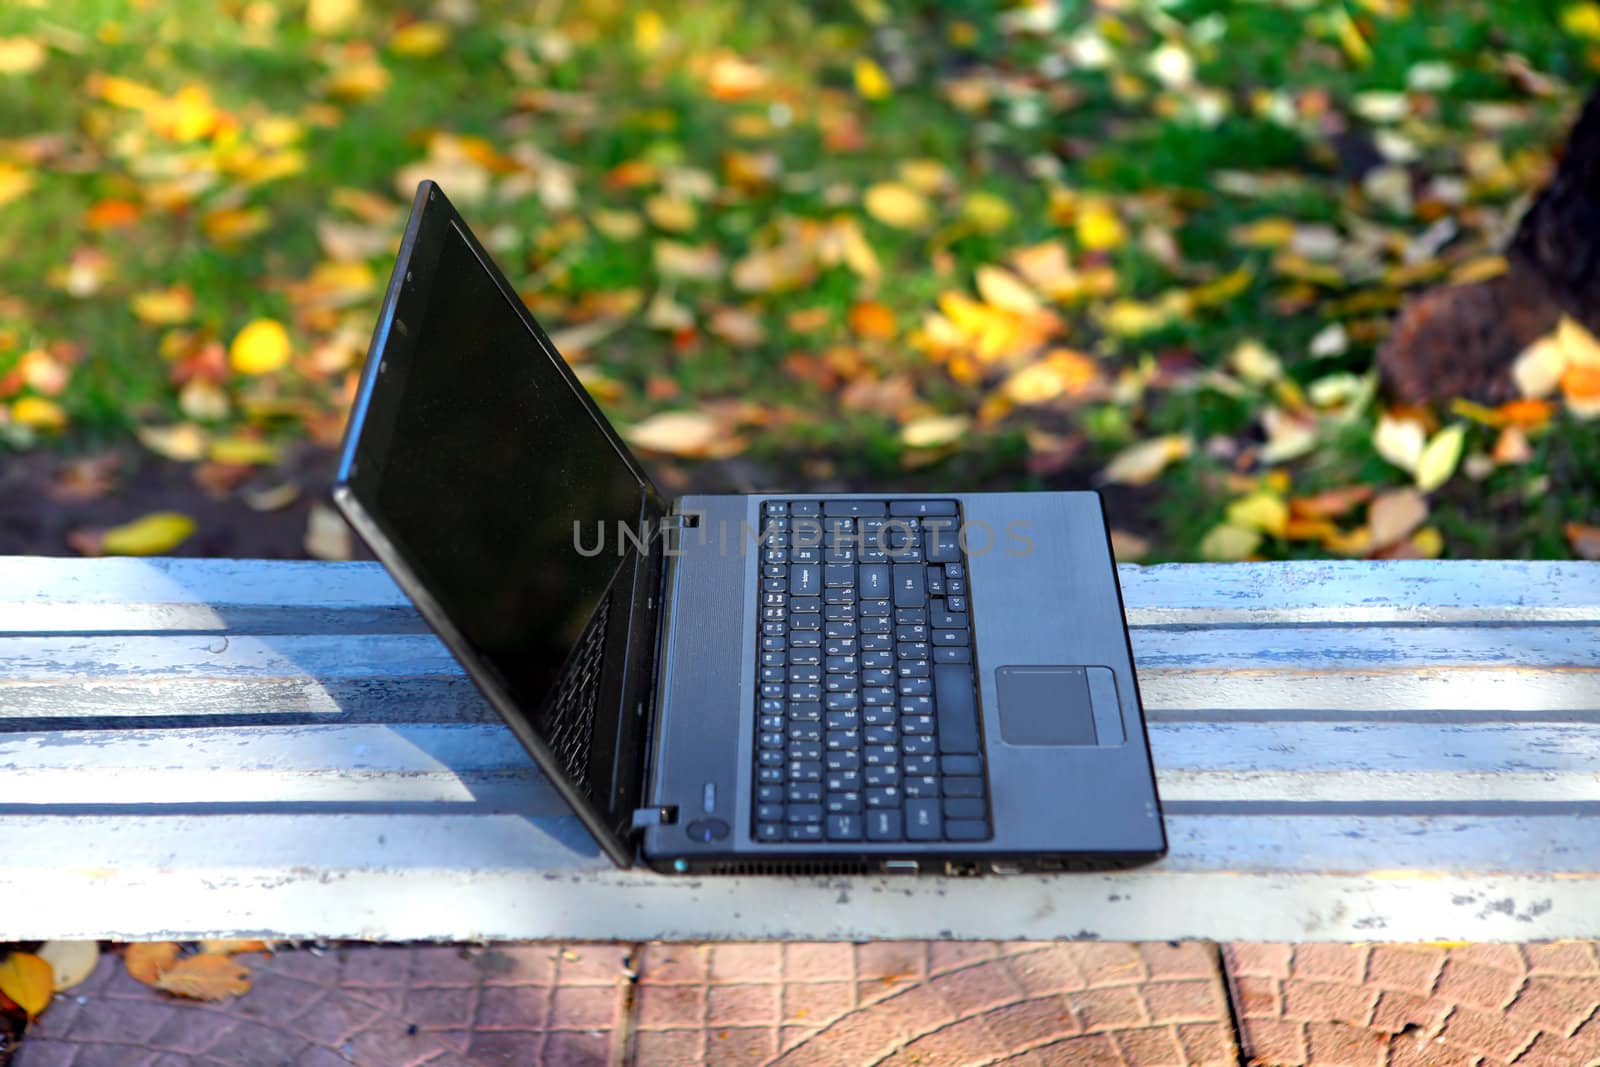 Laptop On The Bench in the Autumn Park